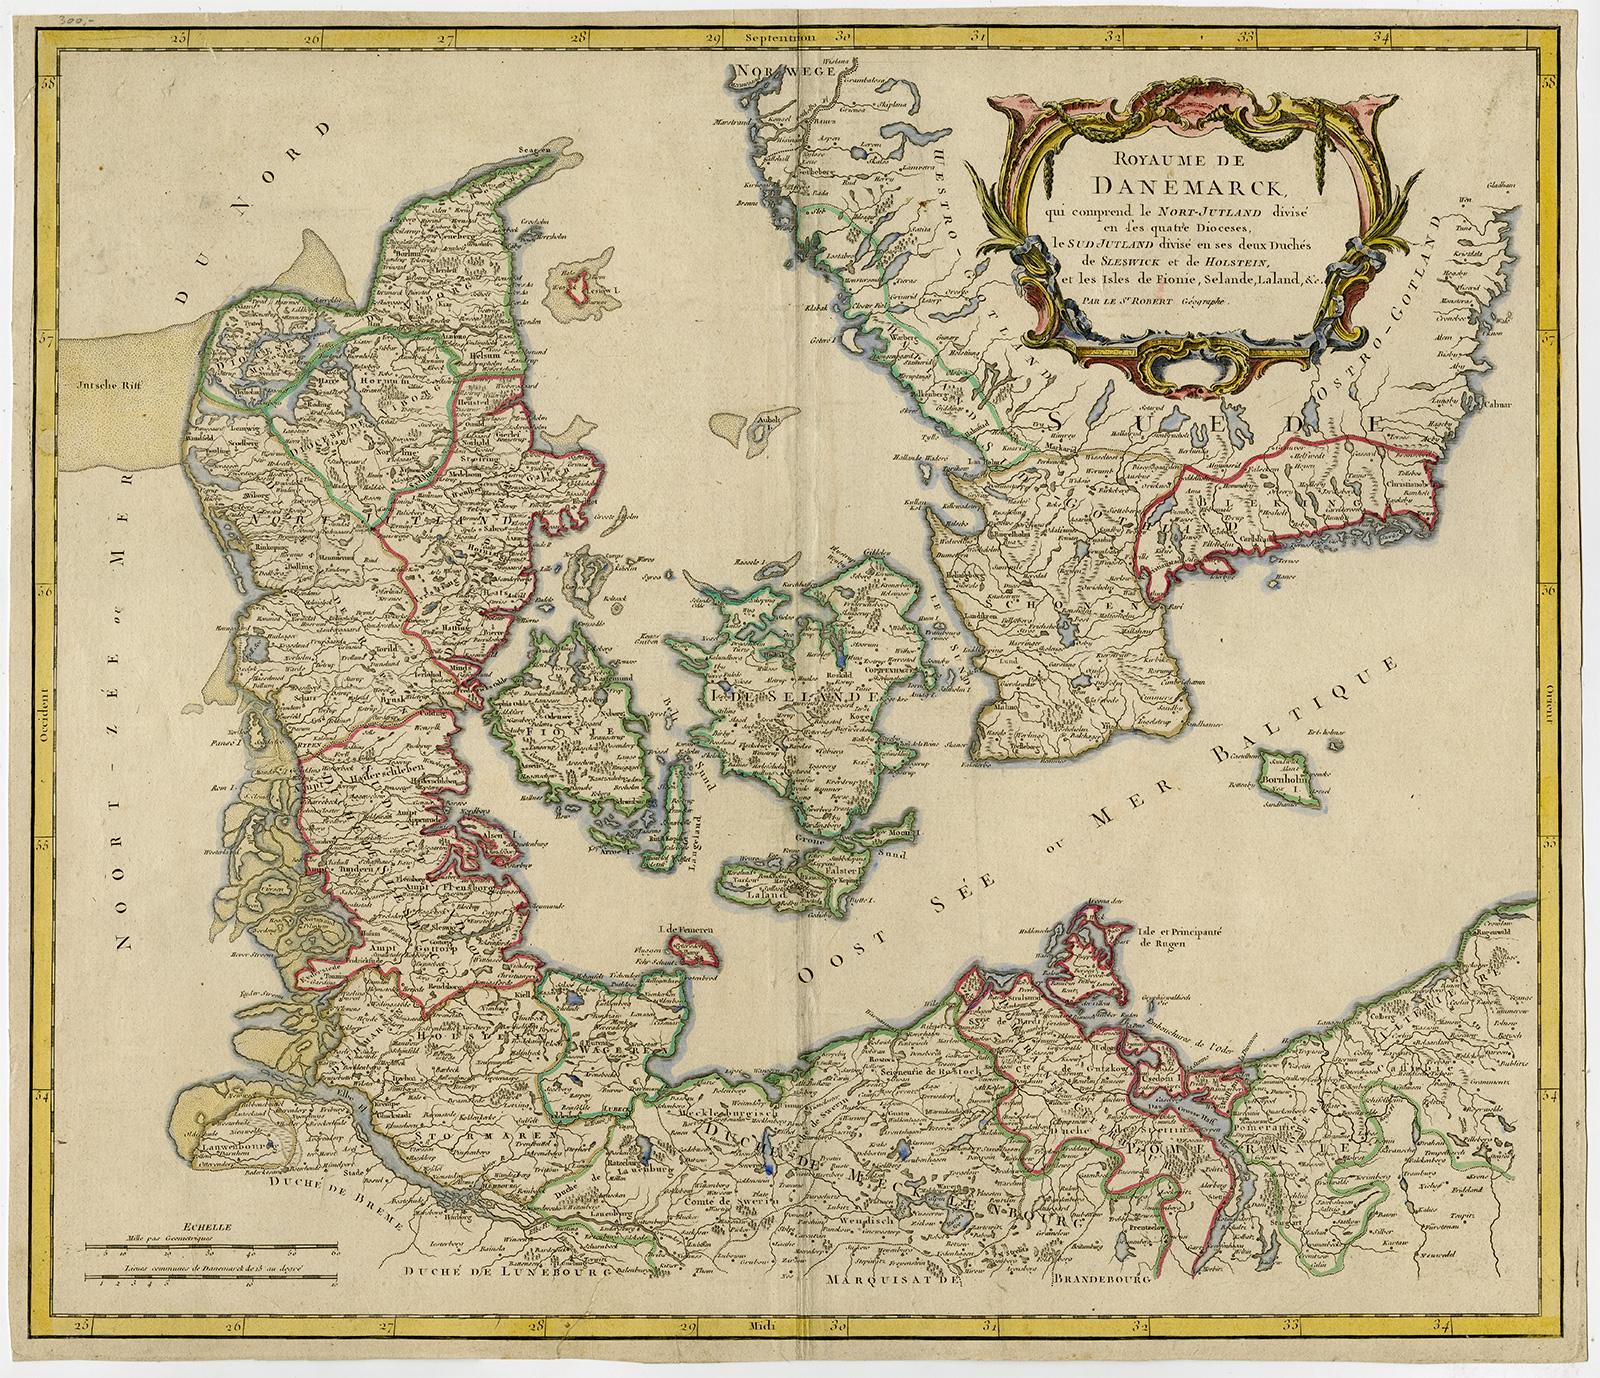 Antique map of Denmark and Jutland by de Vaugondy - Handcol. engraving - 18th c. - Print by Unknown